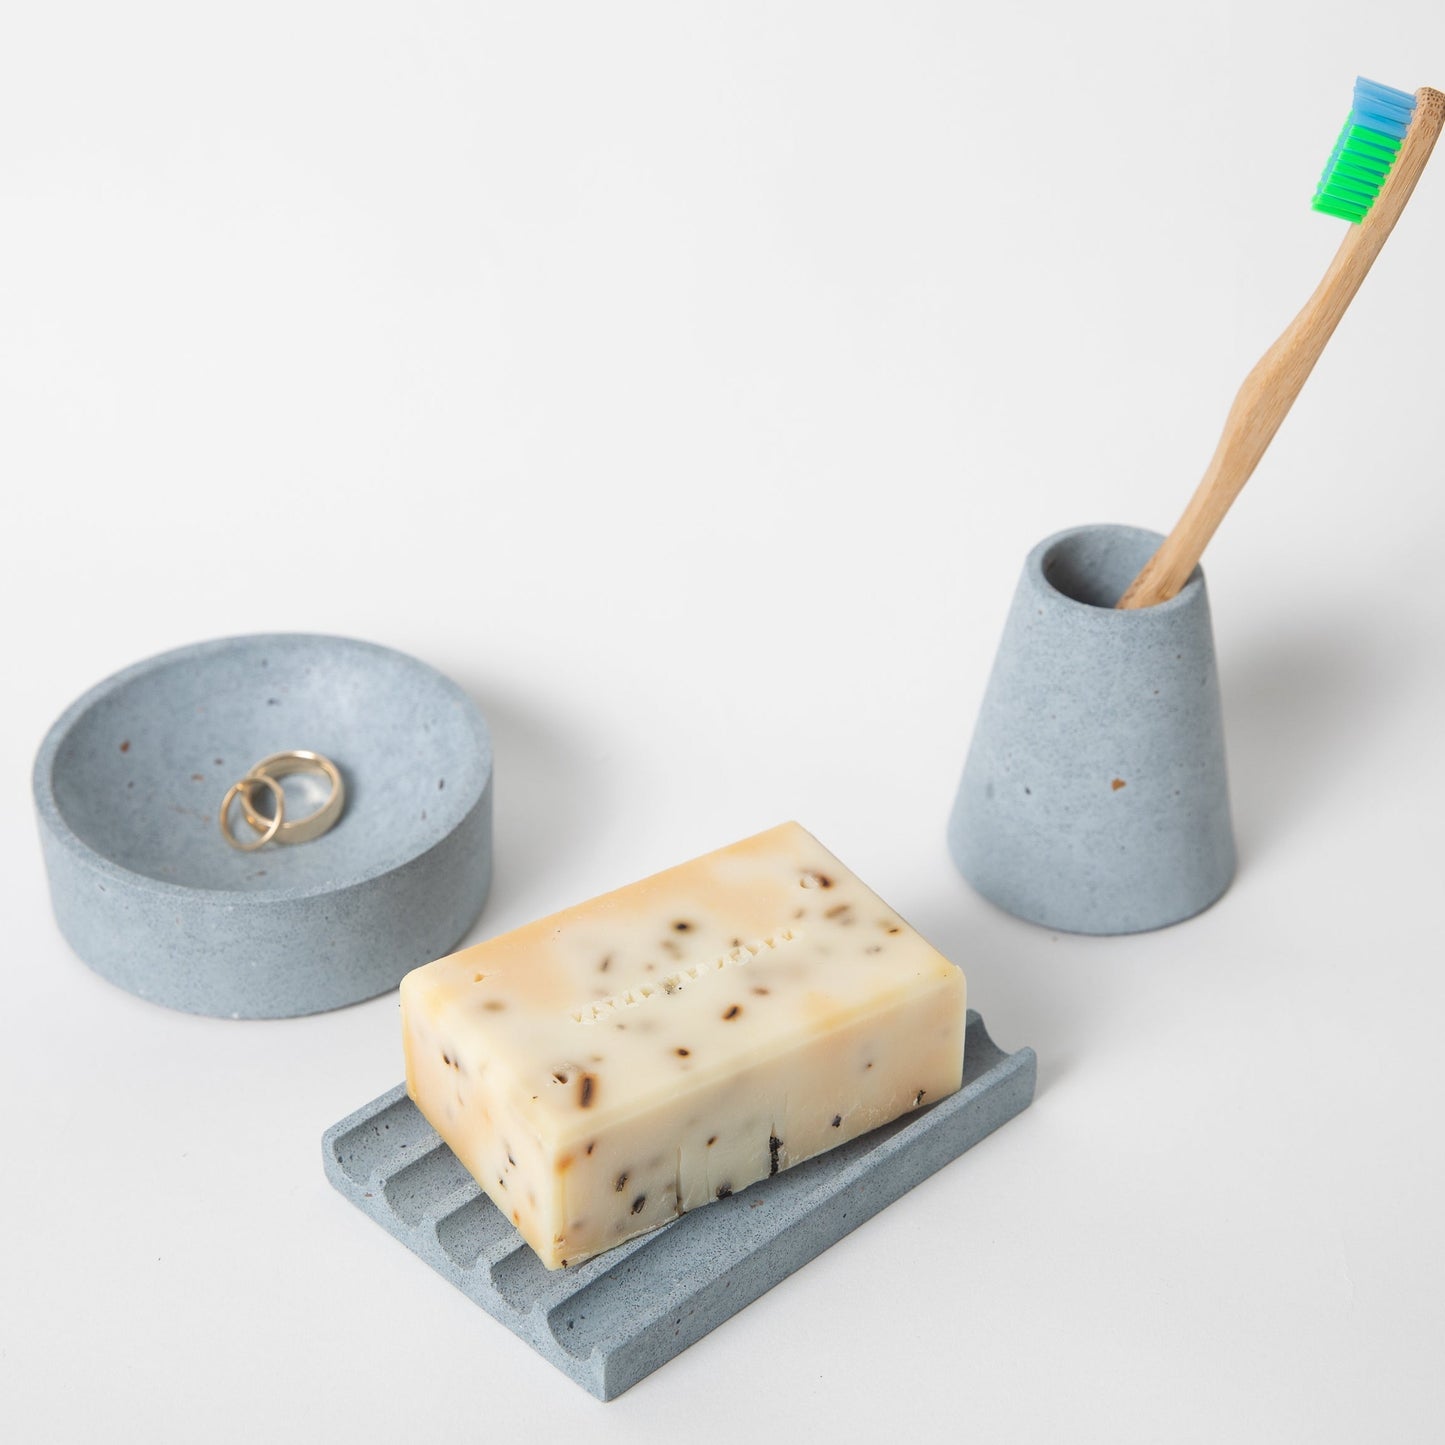 Soap dish, toothbrush holder, and a 4" catch all in light blue terrazzo.